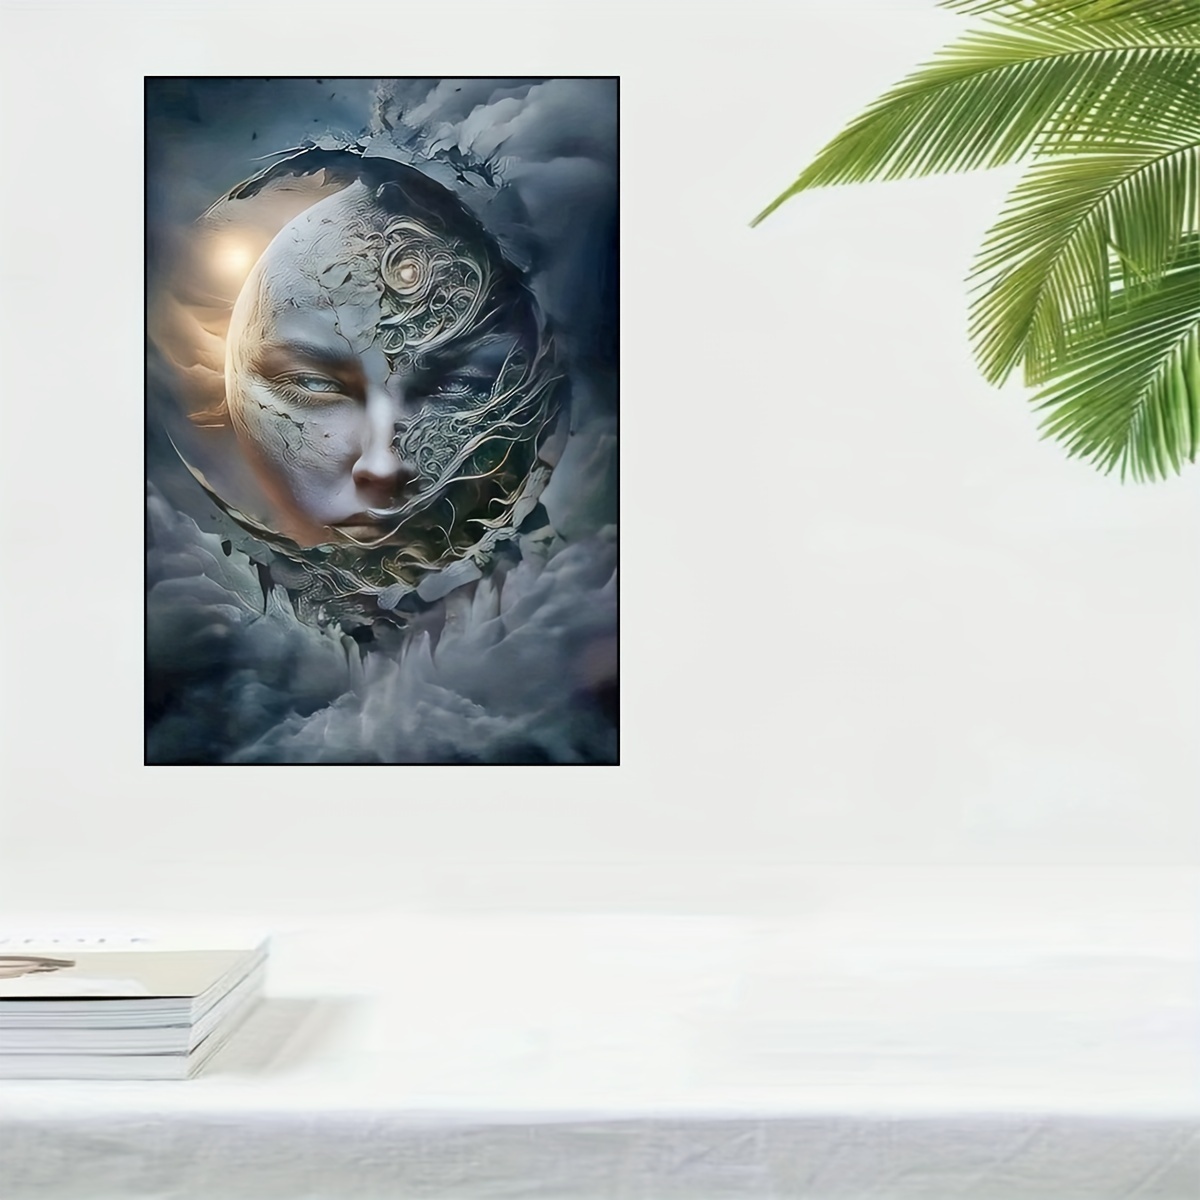 

1pc Diy Artificial Full Diamonds Painting Set For Adults Beginners, Demon Pattern Diamonds Art For Home Wall Decoration And Gift 15.7*23.6in